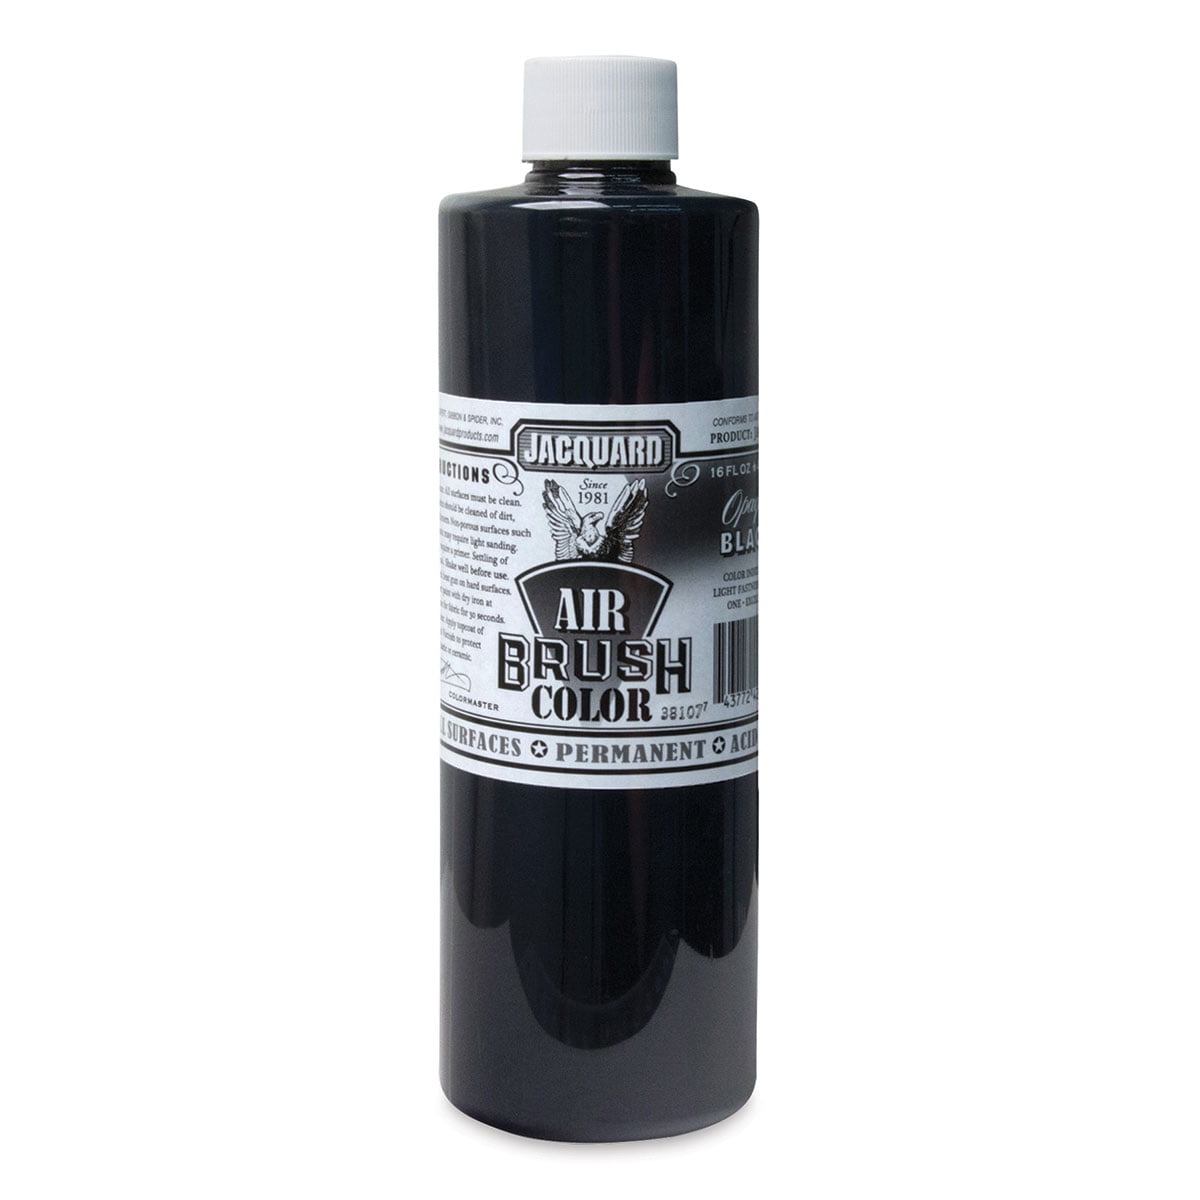 Jacquard fabric paint black 8 oz for Clothes , Permanent All